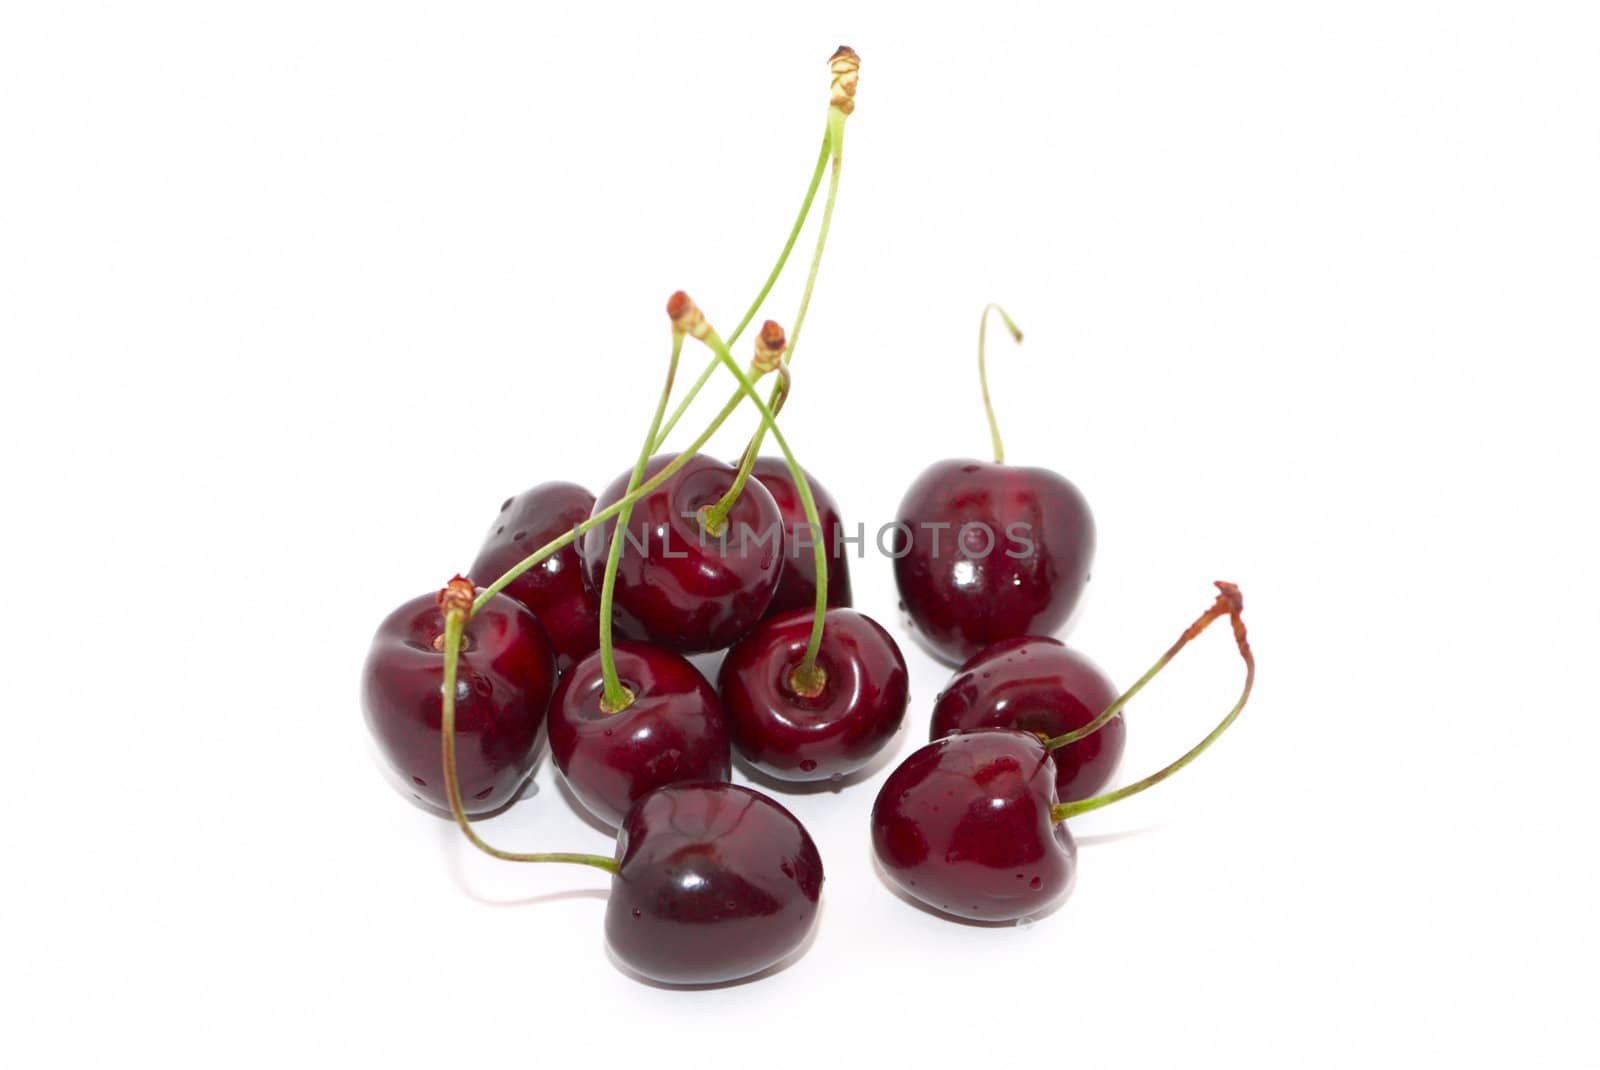 Cherries with green stems